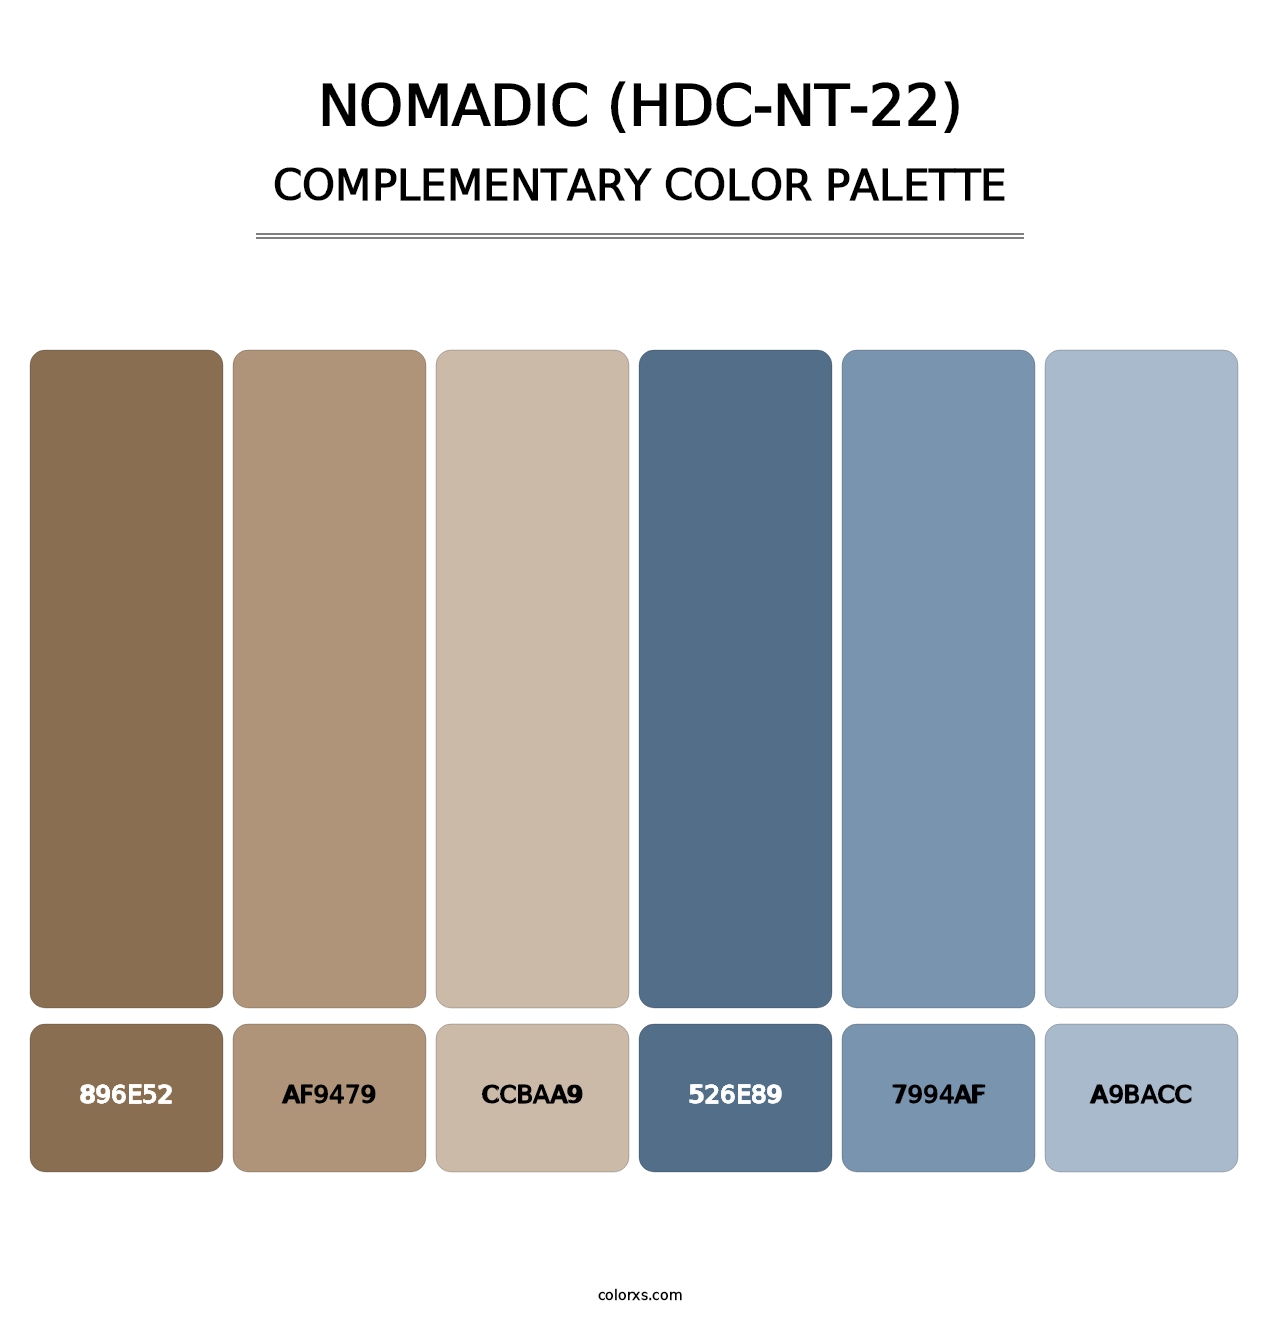 Nomadic (HDC-NT-22) - Complementary Color Palette